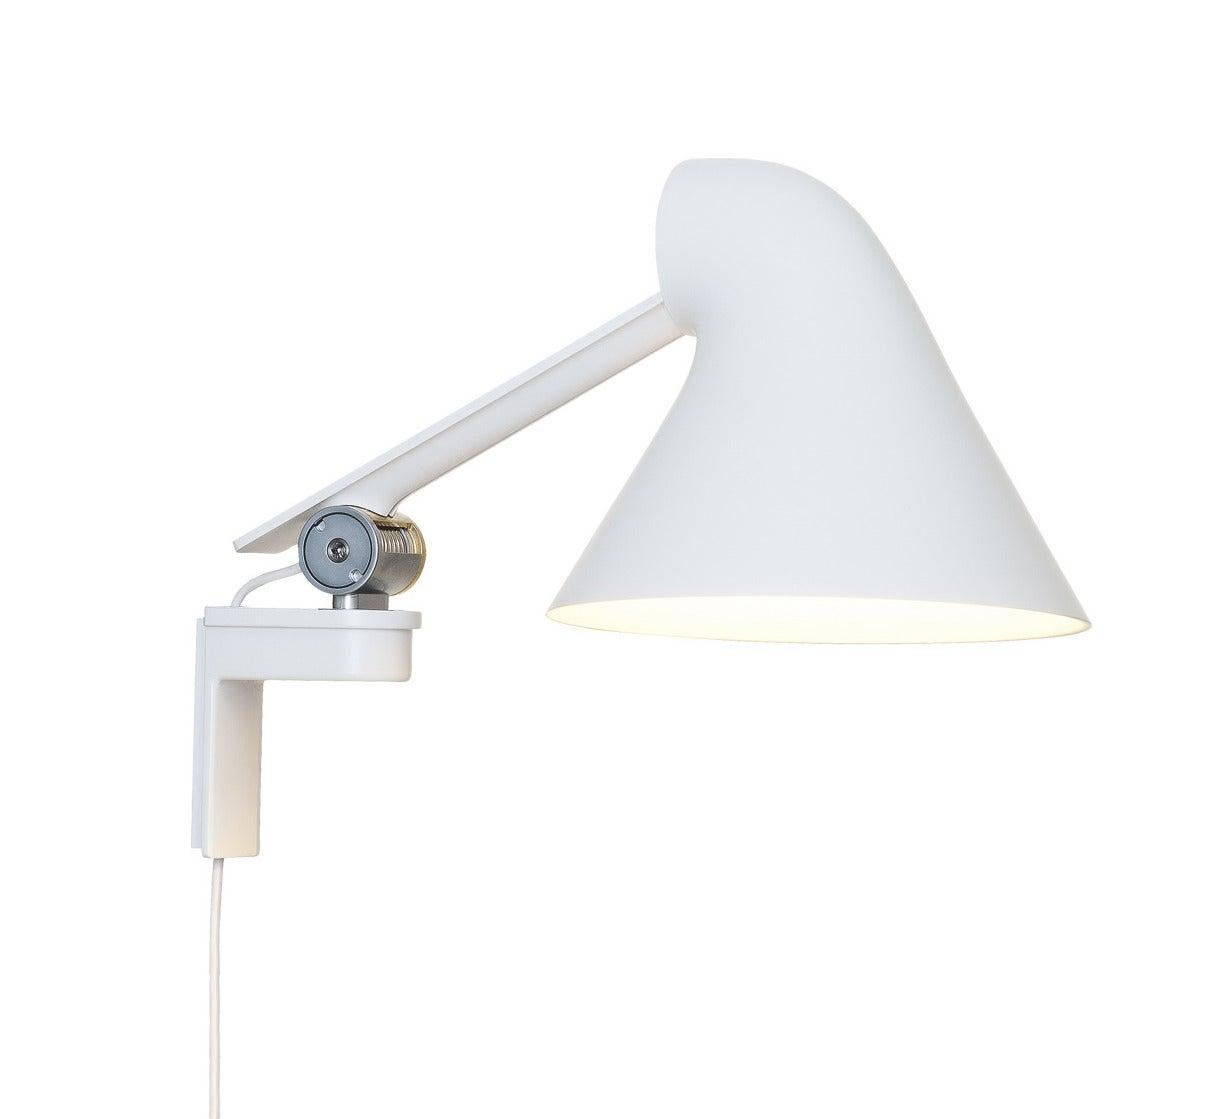 Louis Poulsen NJP Wall Long Lamp in Light Gray Aluminum by Nendo, Oki Sato In New Condition For Sale In New York, NY